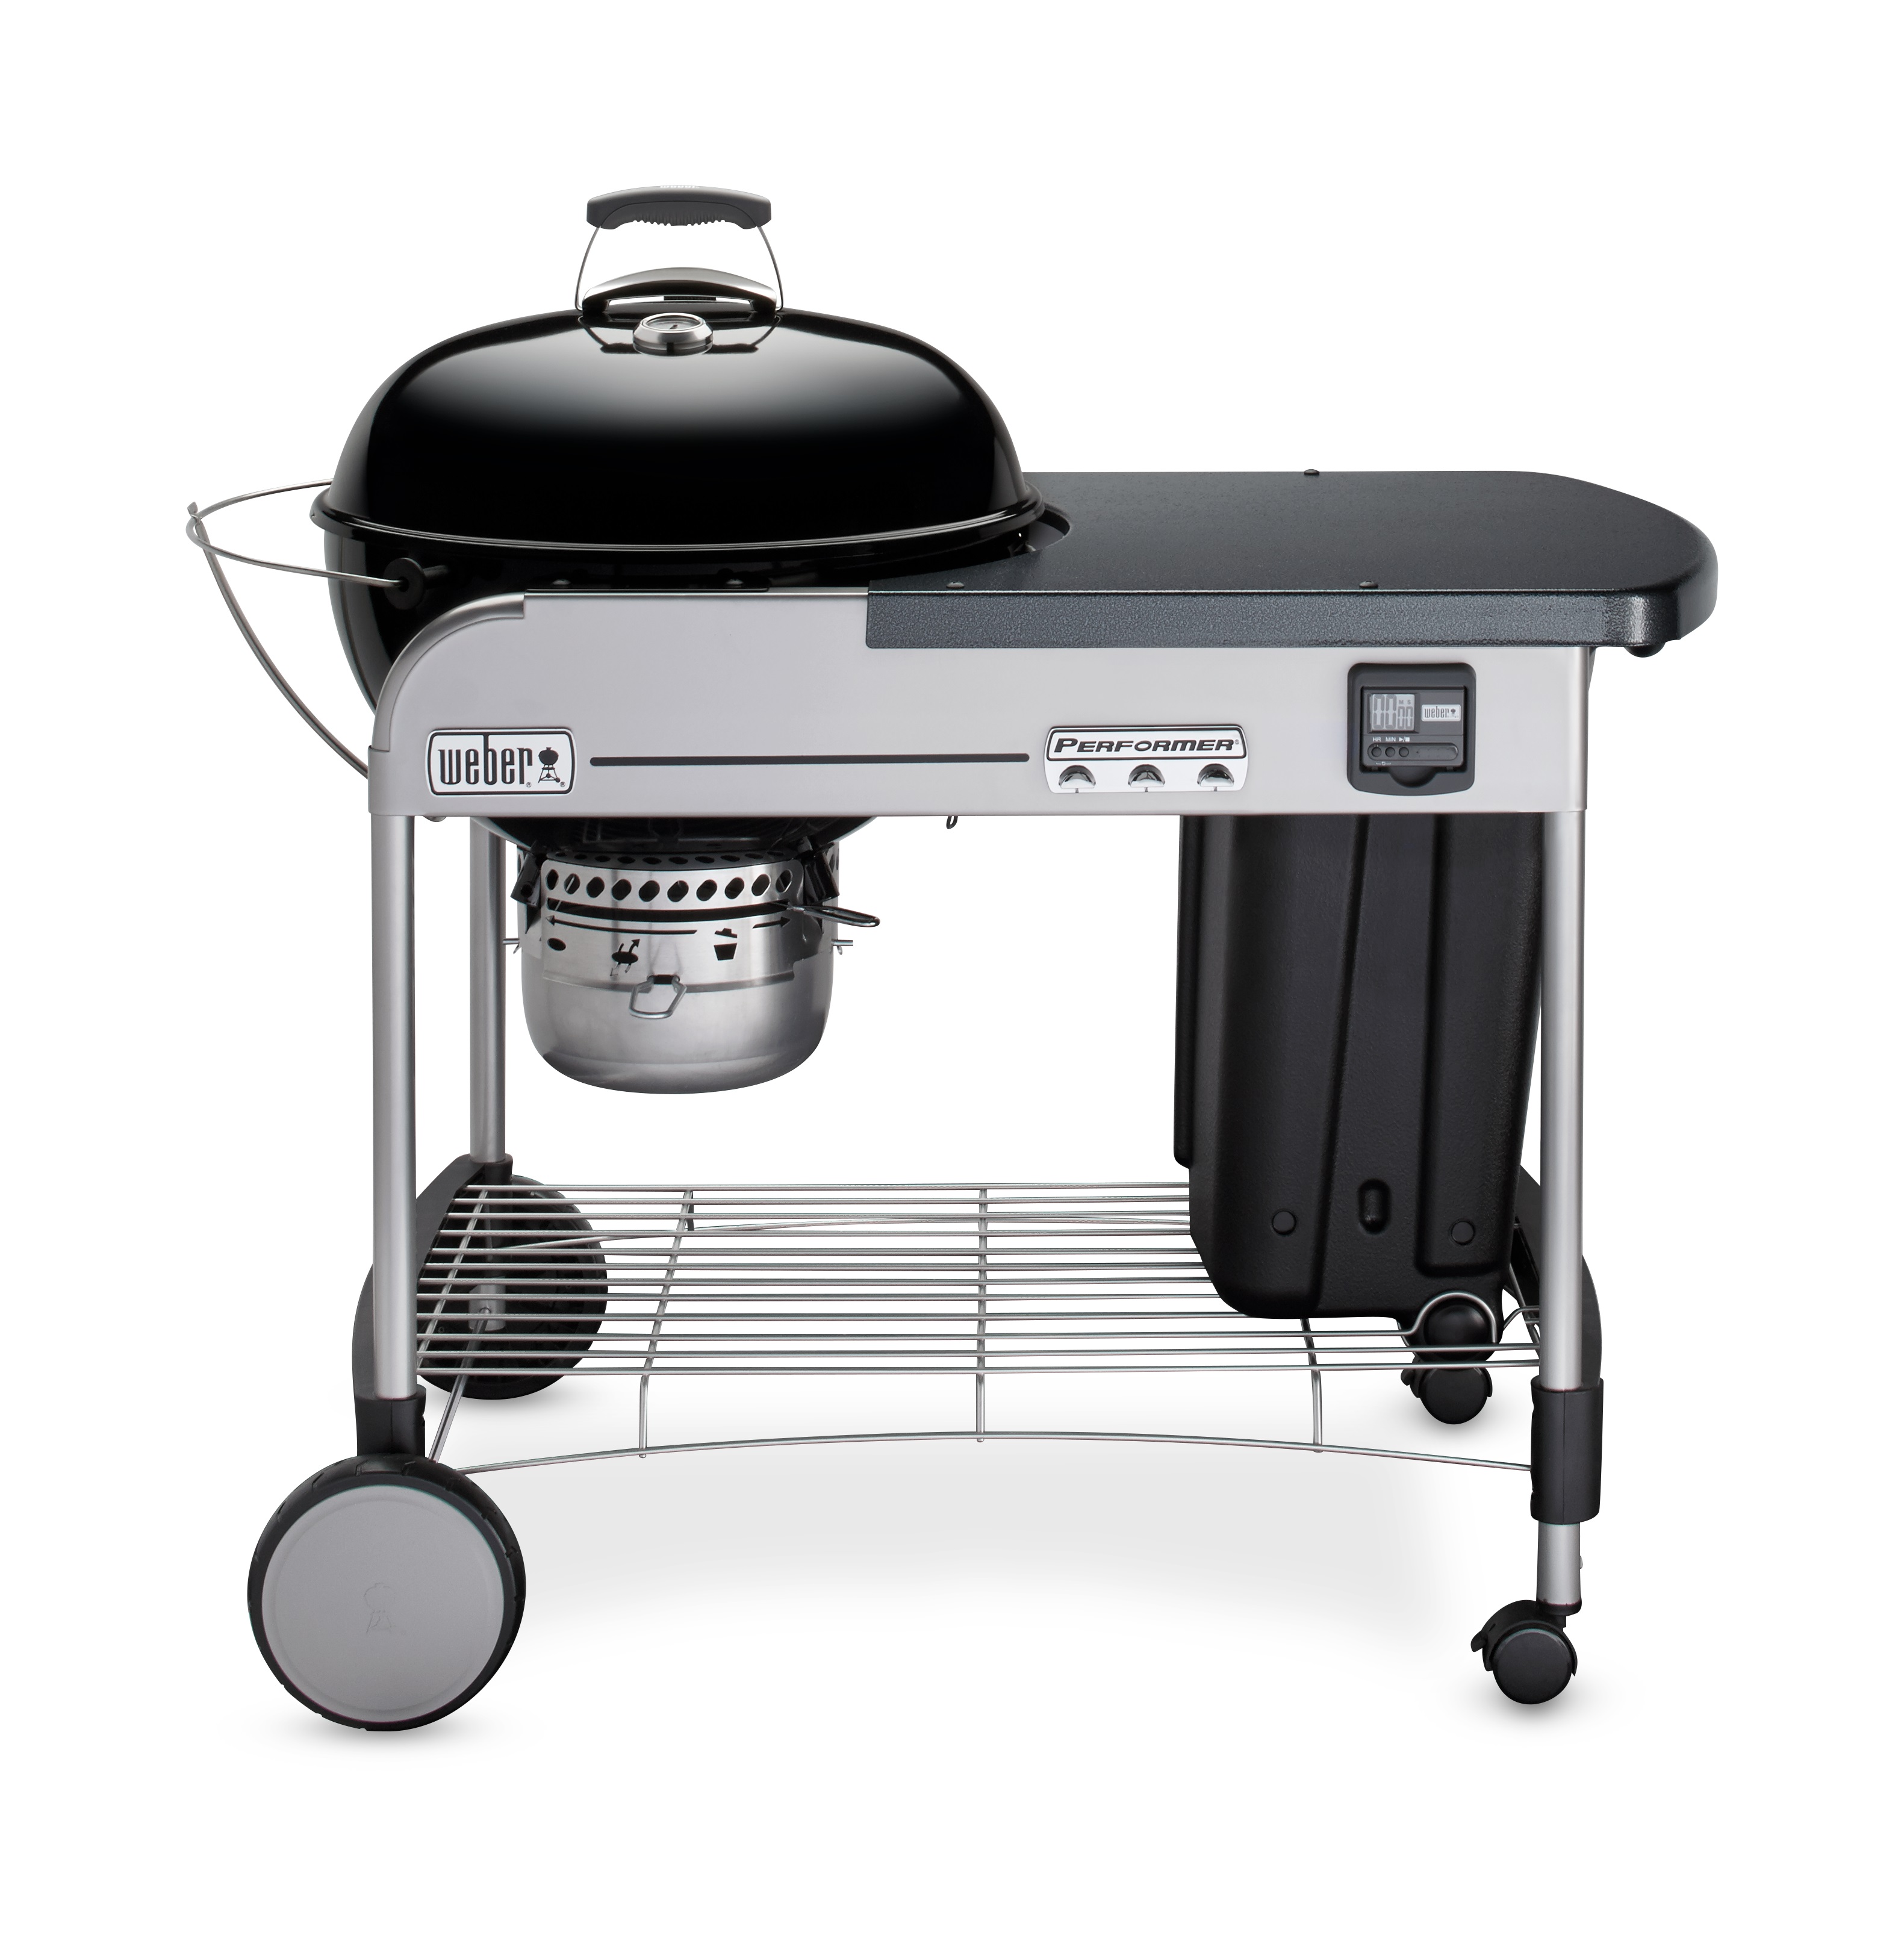 22.5 performer premium charcoal grill product image